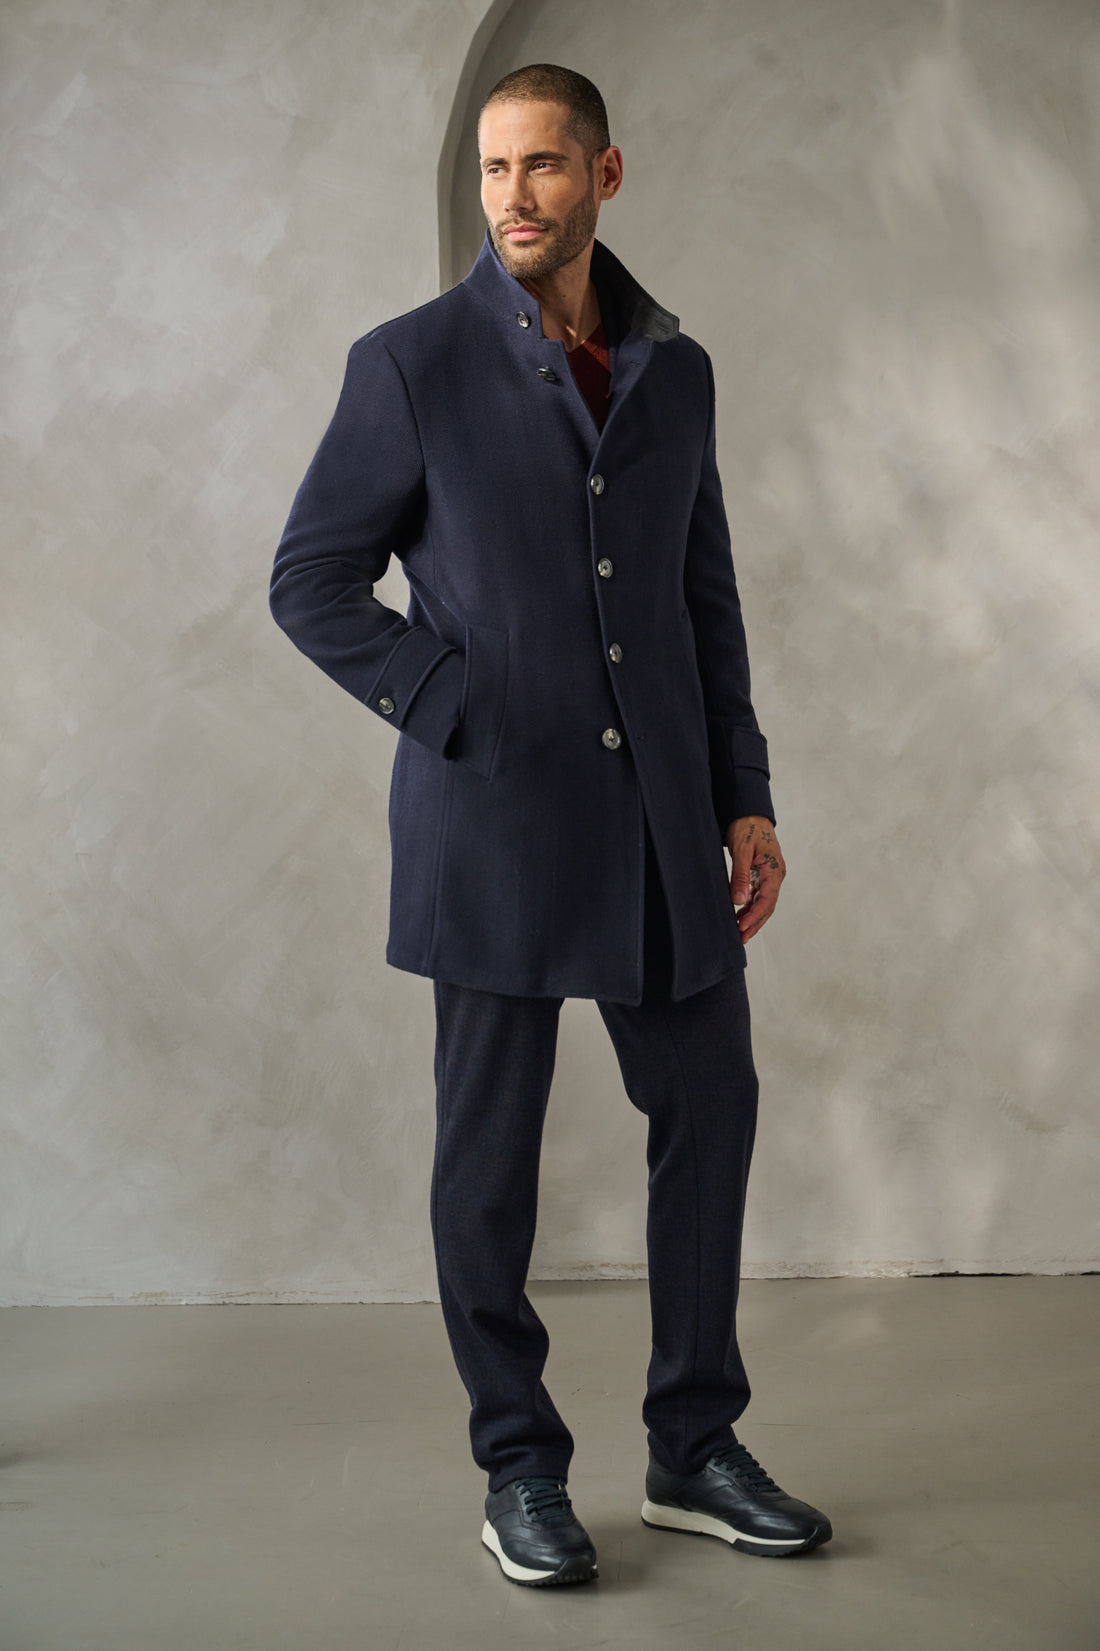 This modern car coat is designed to serve you well in the city: whether driving or walking, this coat offers luxe hybrid design tailored to reflect the scope of men's style today.  With its subtle navy herringbone pattern, and details such as the suede inside collar, you will love this new coat - a perfect blend of style and function.